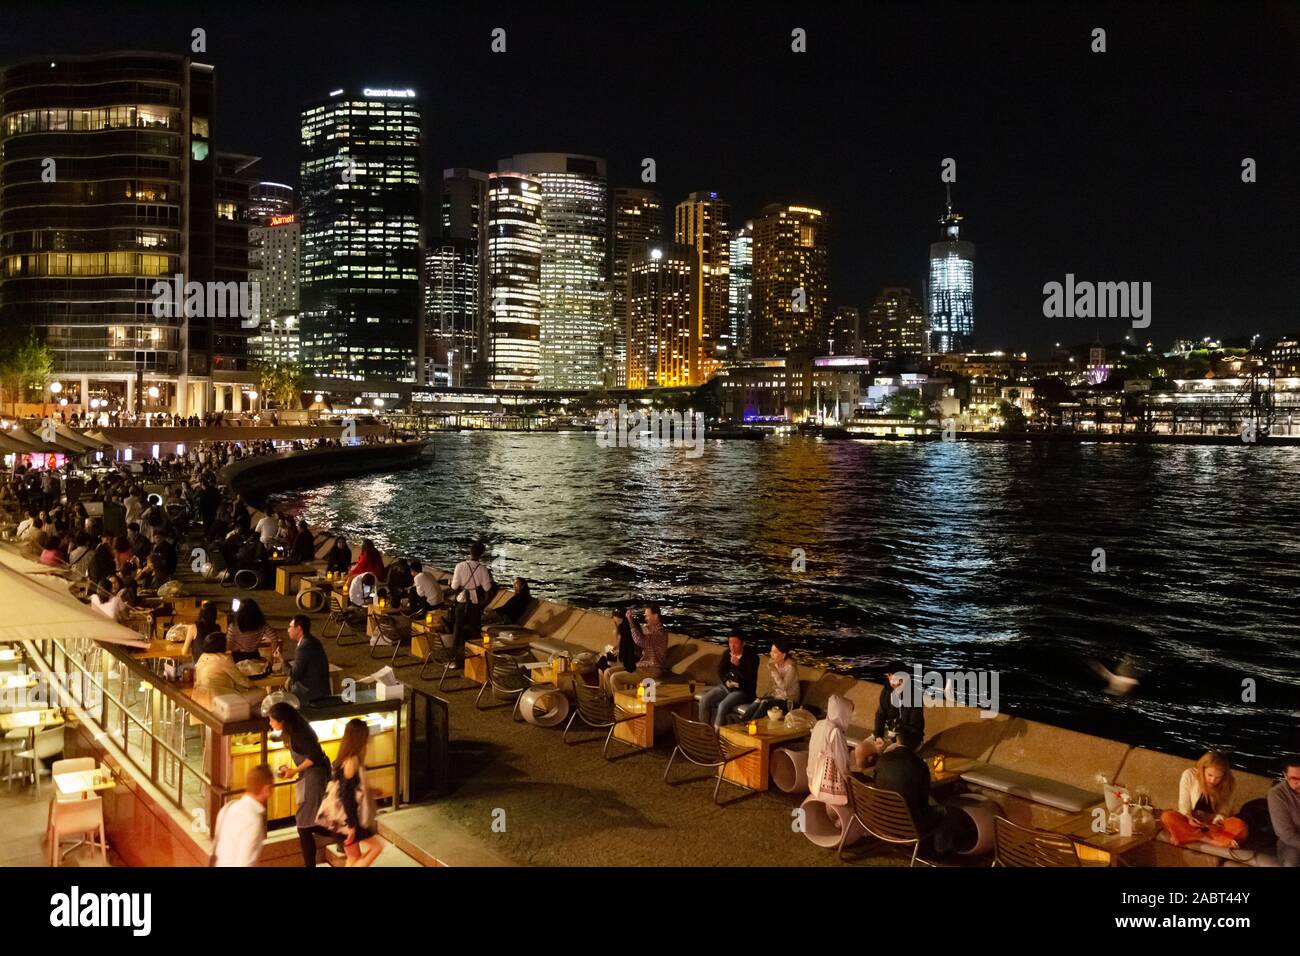 Sydney Night; Sydney Harbour and Circular Quay at night, with skyscrapers and people eating at the Opera Bar in spring; Sydney Australia Stock Photo